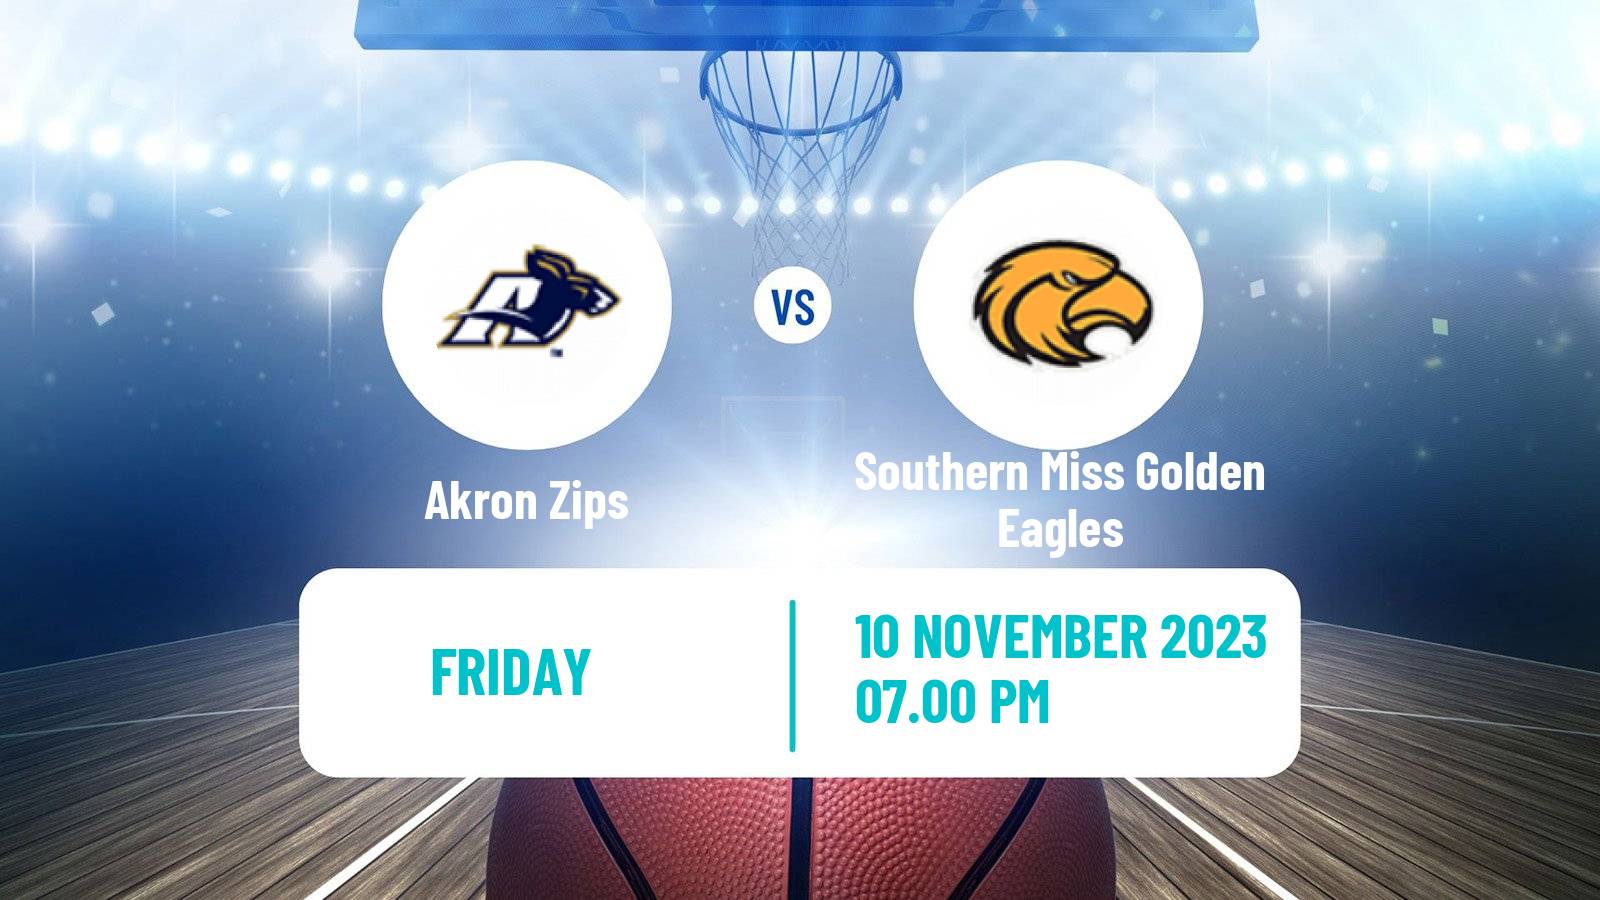 Basketball NCAA College Basketball Akron Zips - Southern Miss Golden Eagles